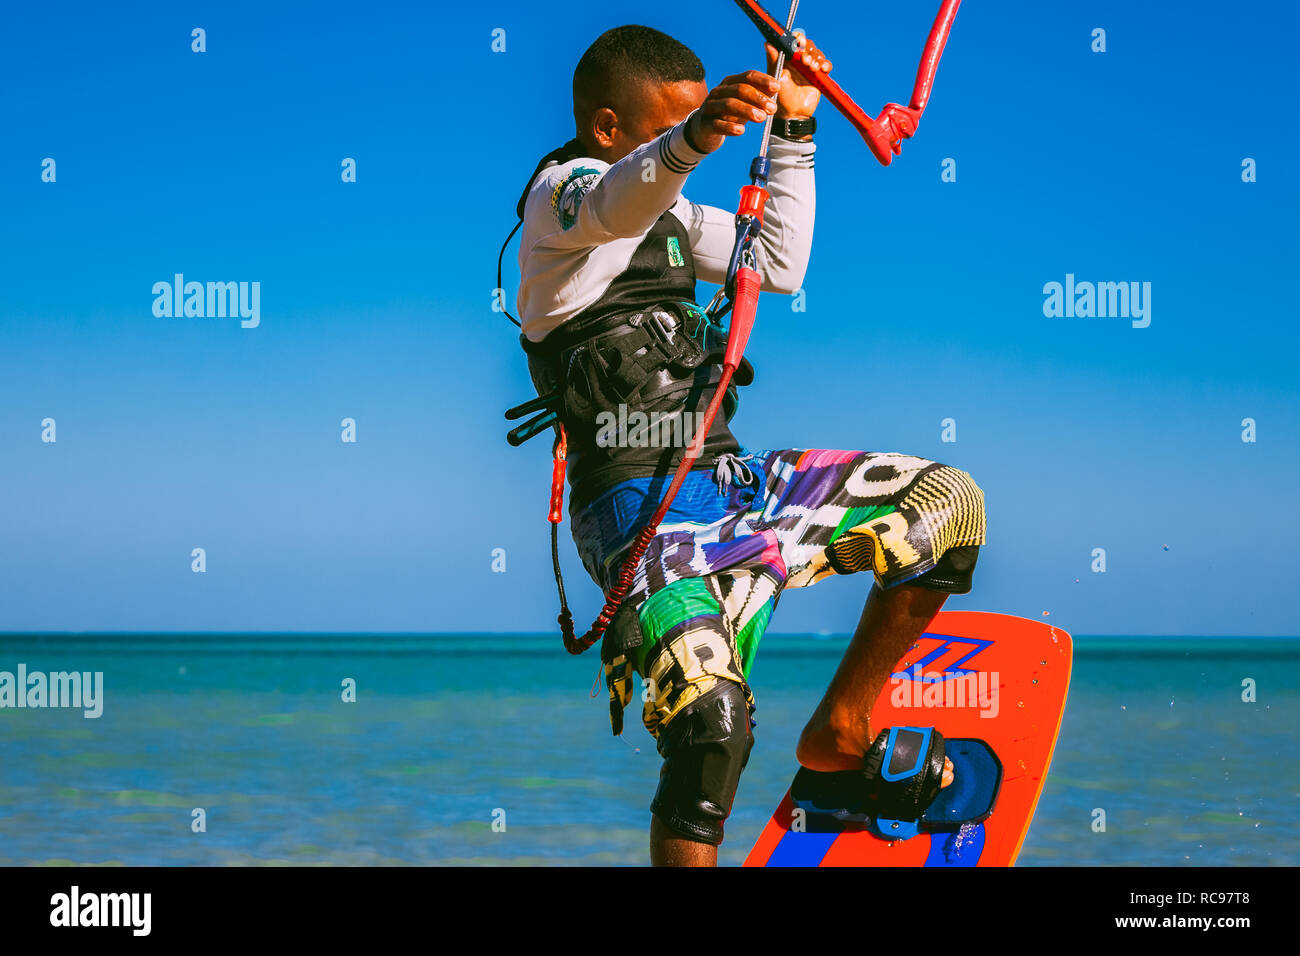 Egypt, Hurghada - 30 November, 2017: Close-up side view of kitesurfer standing on the wakeboard holding the kite straps. Amazing Red sea and the blue sky background. The professional kitesurfing. Stock Photo